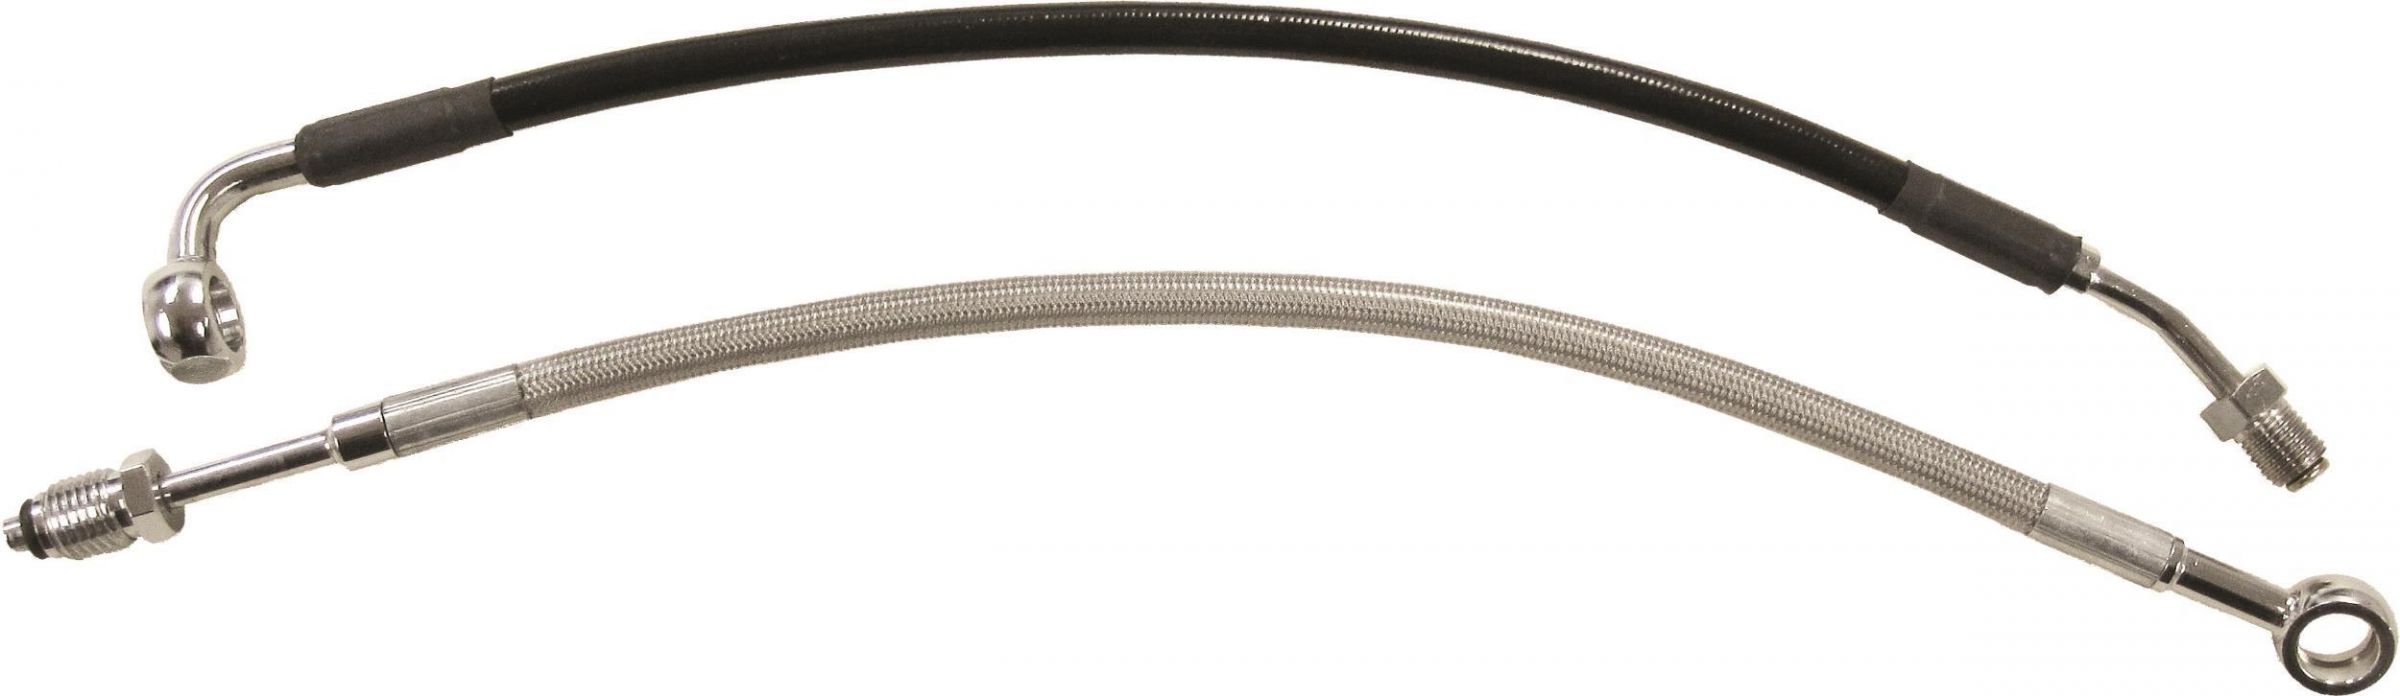 86OS-GOODRIDG-HD0006-1CBK-4 Stainless Steel Braided Hydraulic Clutch Line Kit - 4in. Over Stock - Black Hose